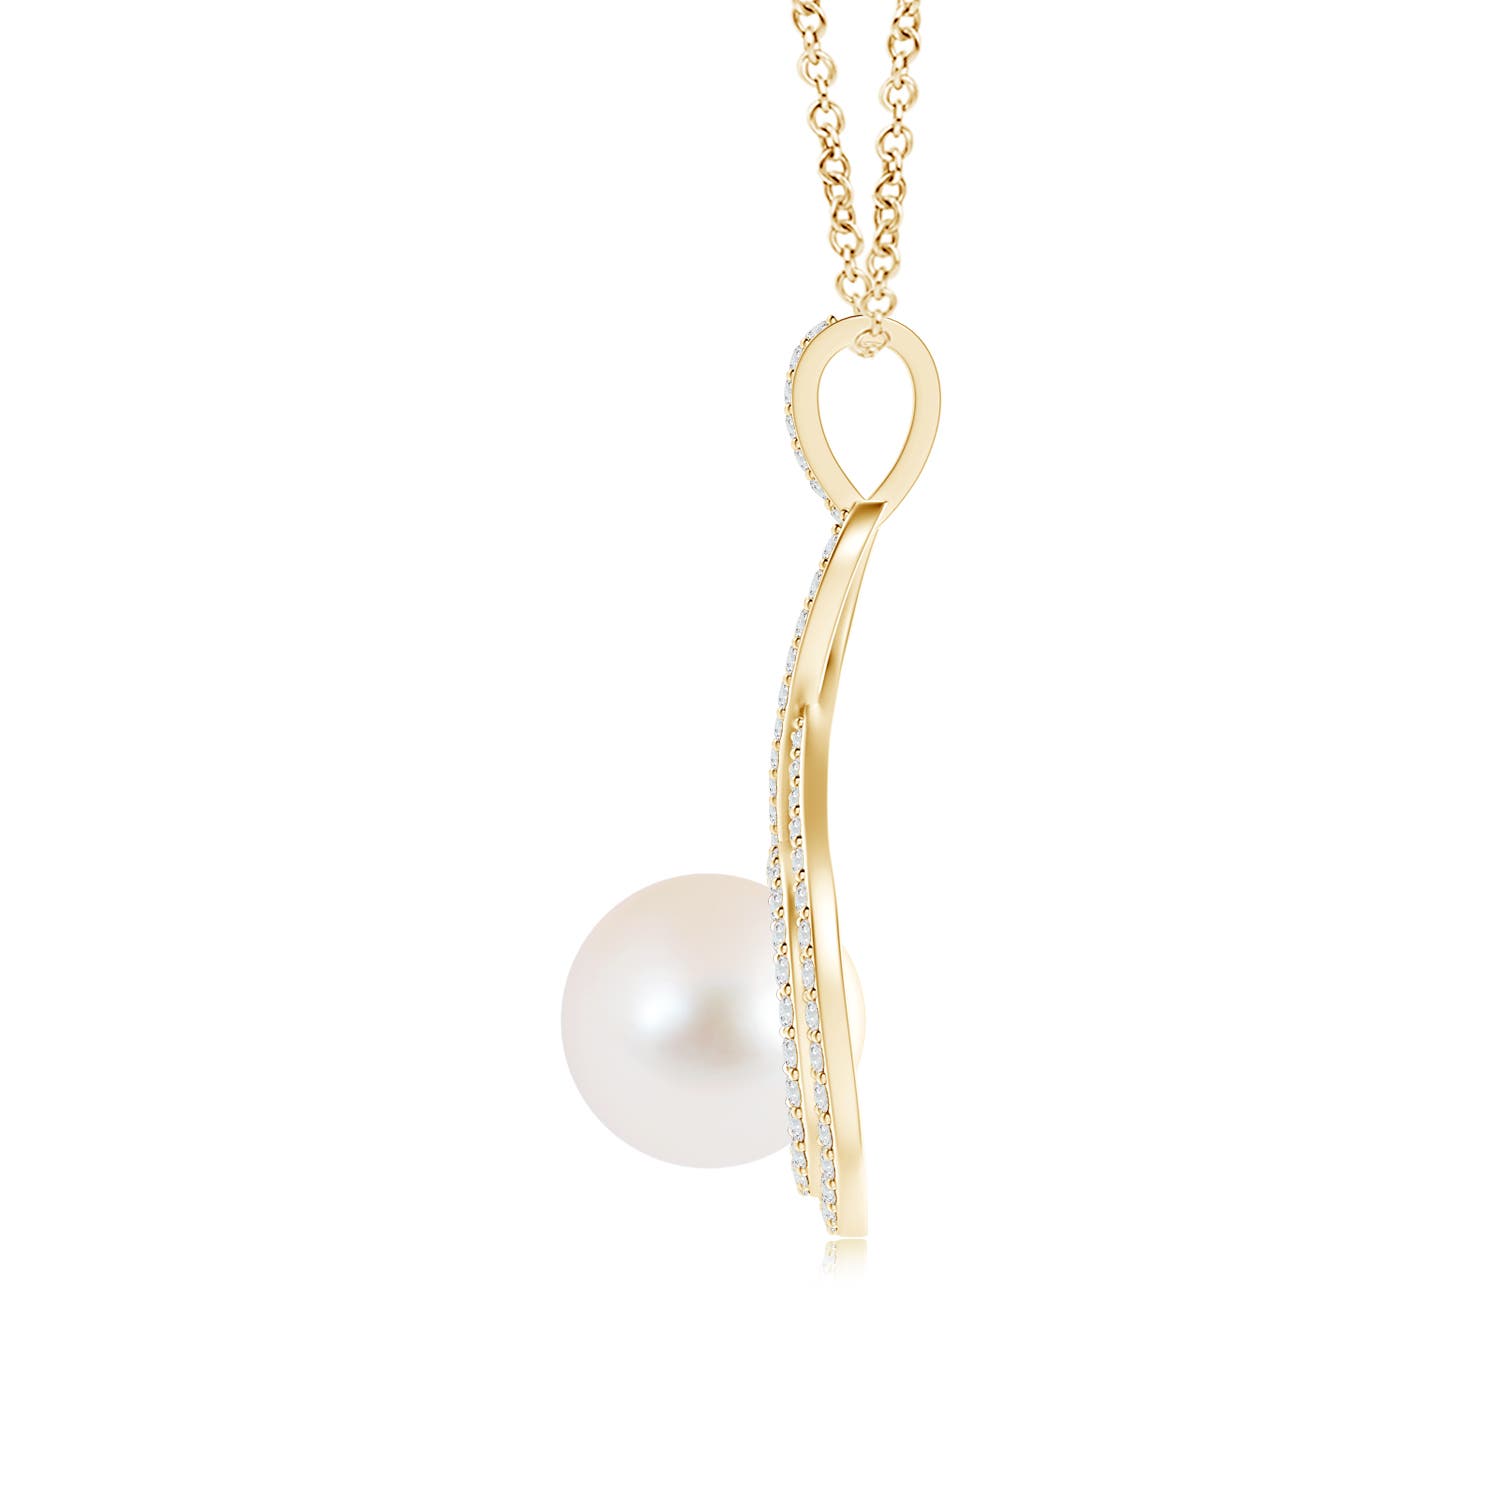 AAA - Freshwater Cultured Pearl / 5.69 CT / 14 KT Yellow Gold